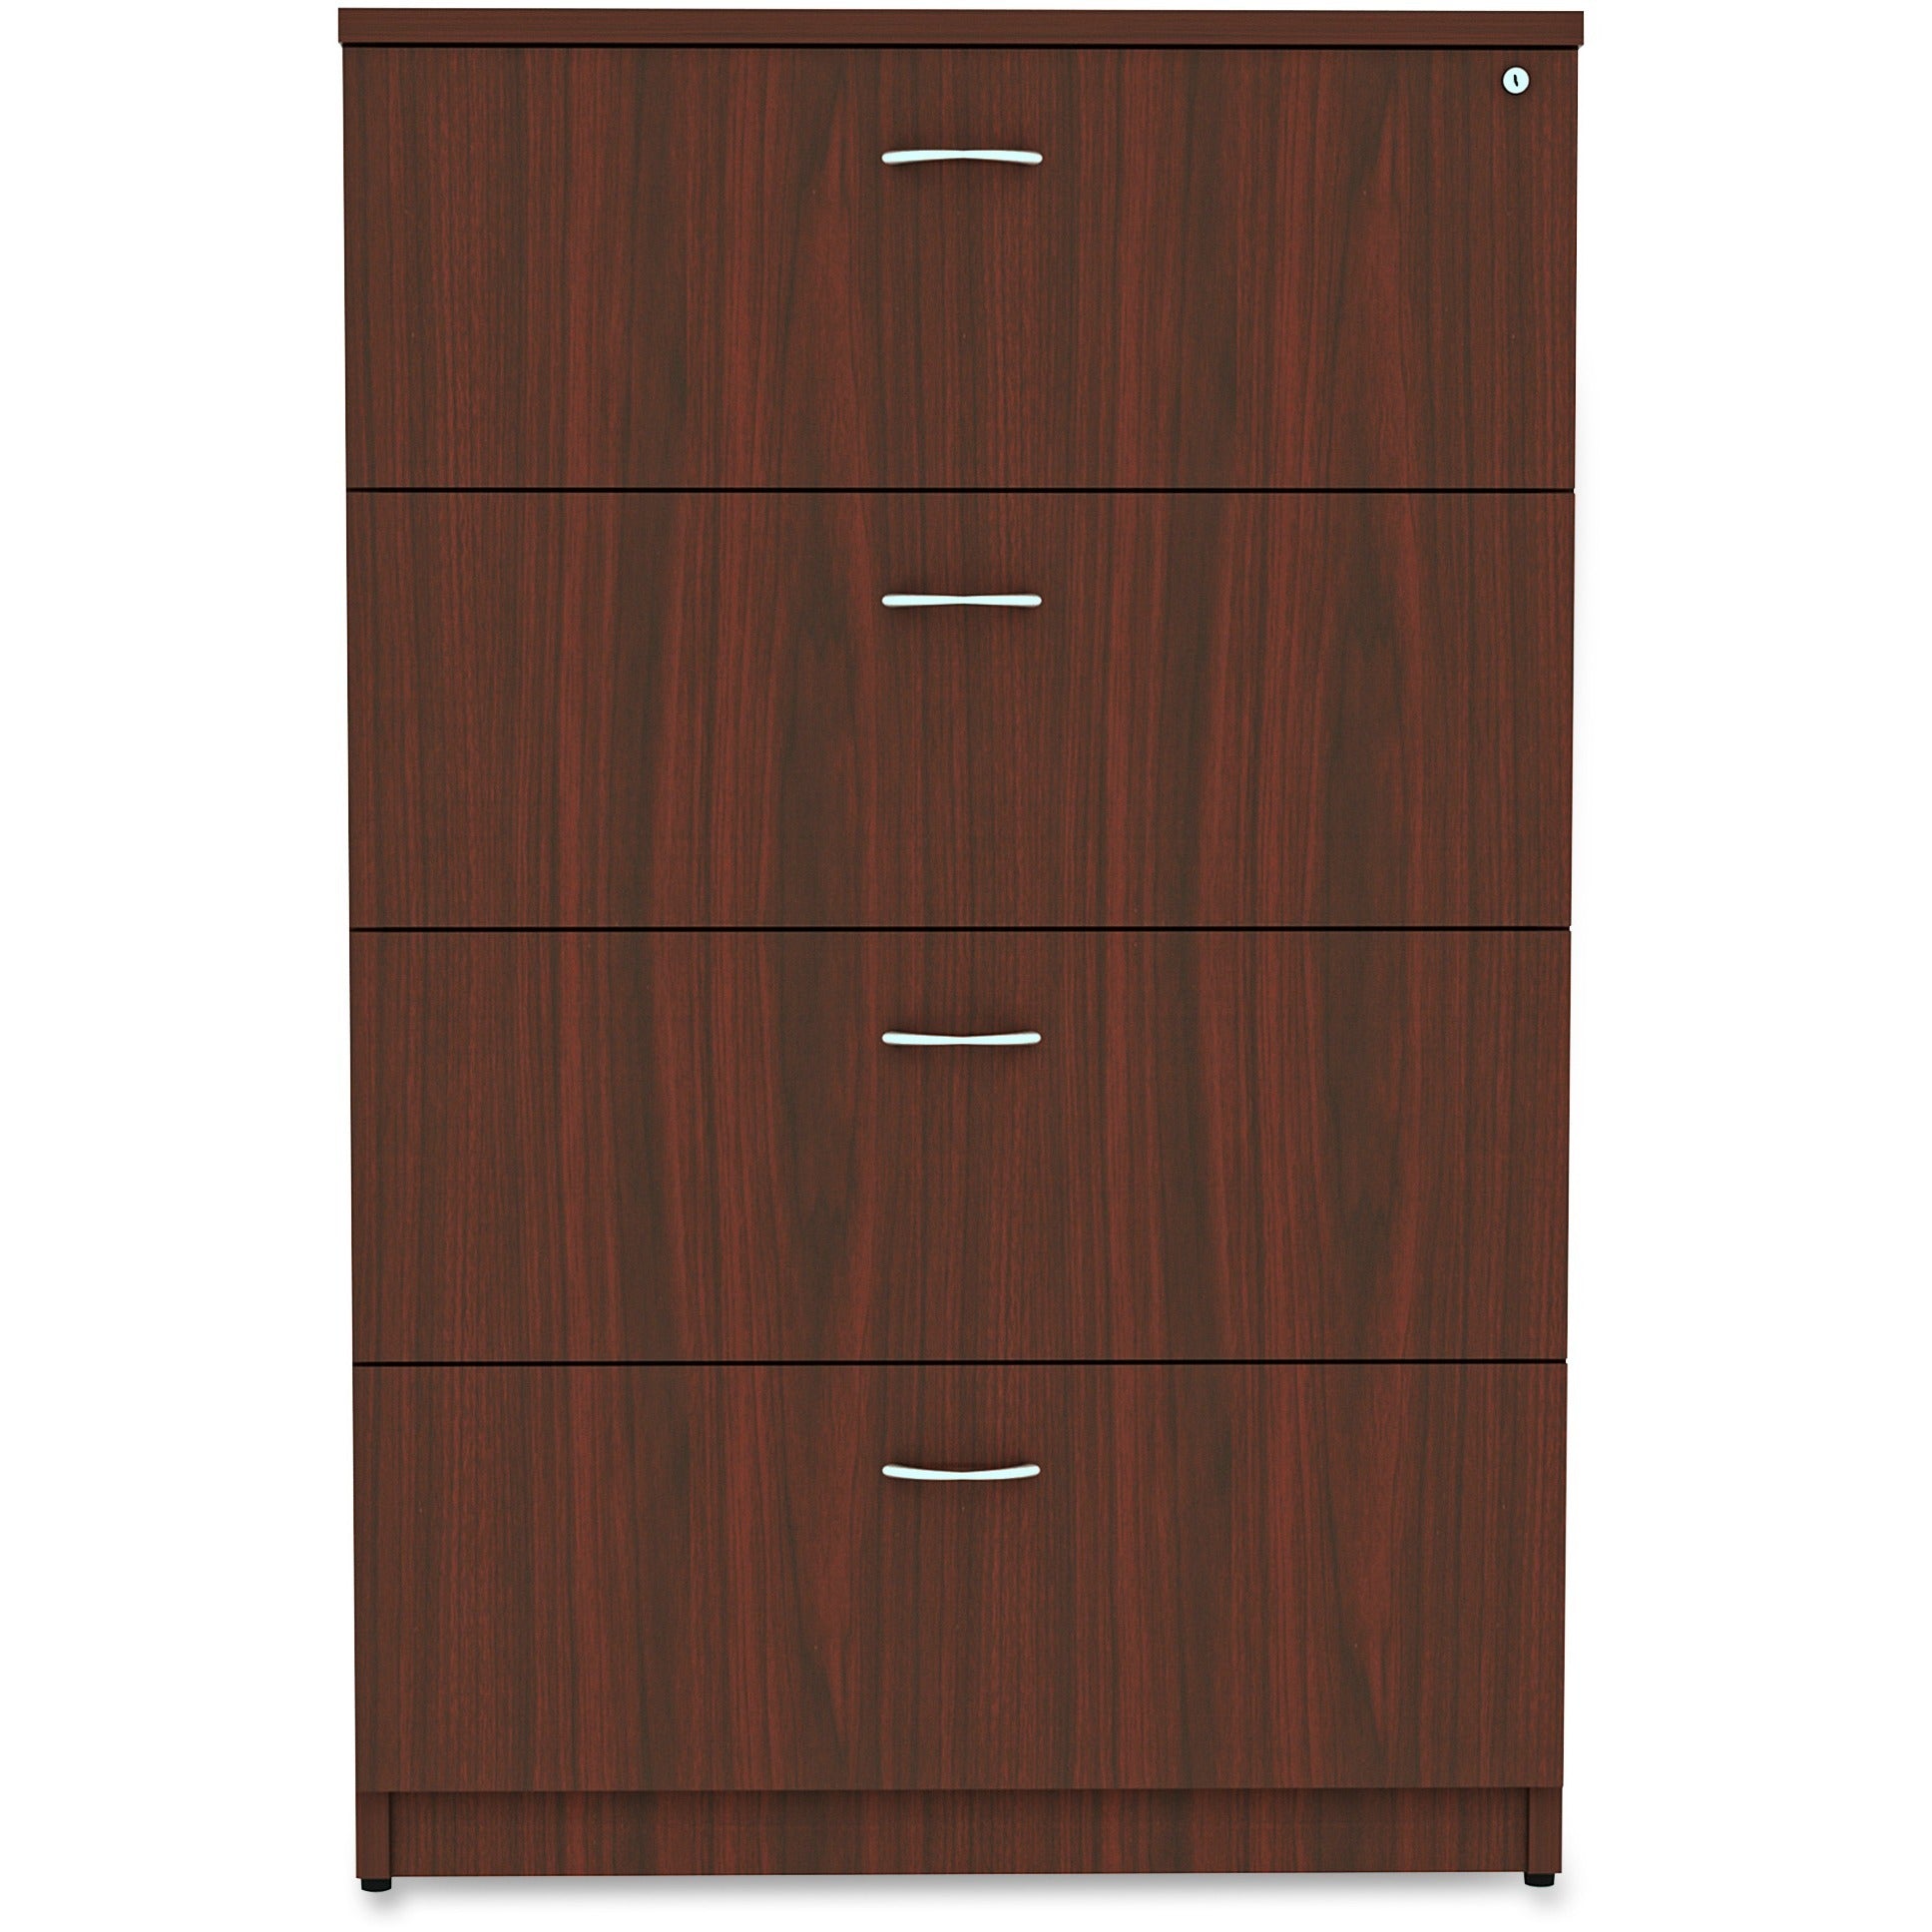 lorell-essentials-series-4-drawer-lateral-file-1-top-355-x-22548-4-x-file-drawers-finish-mahogany-laminate_llr34386 - 2